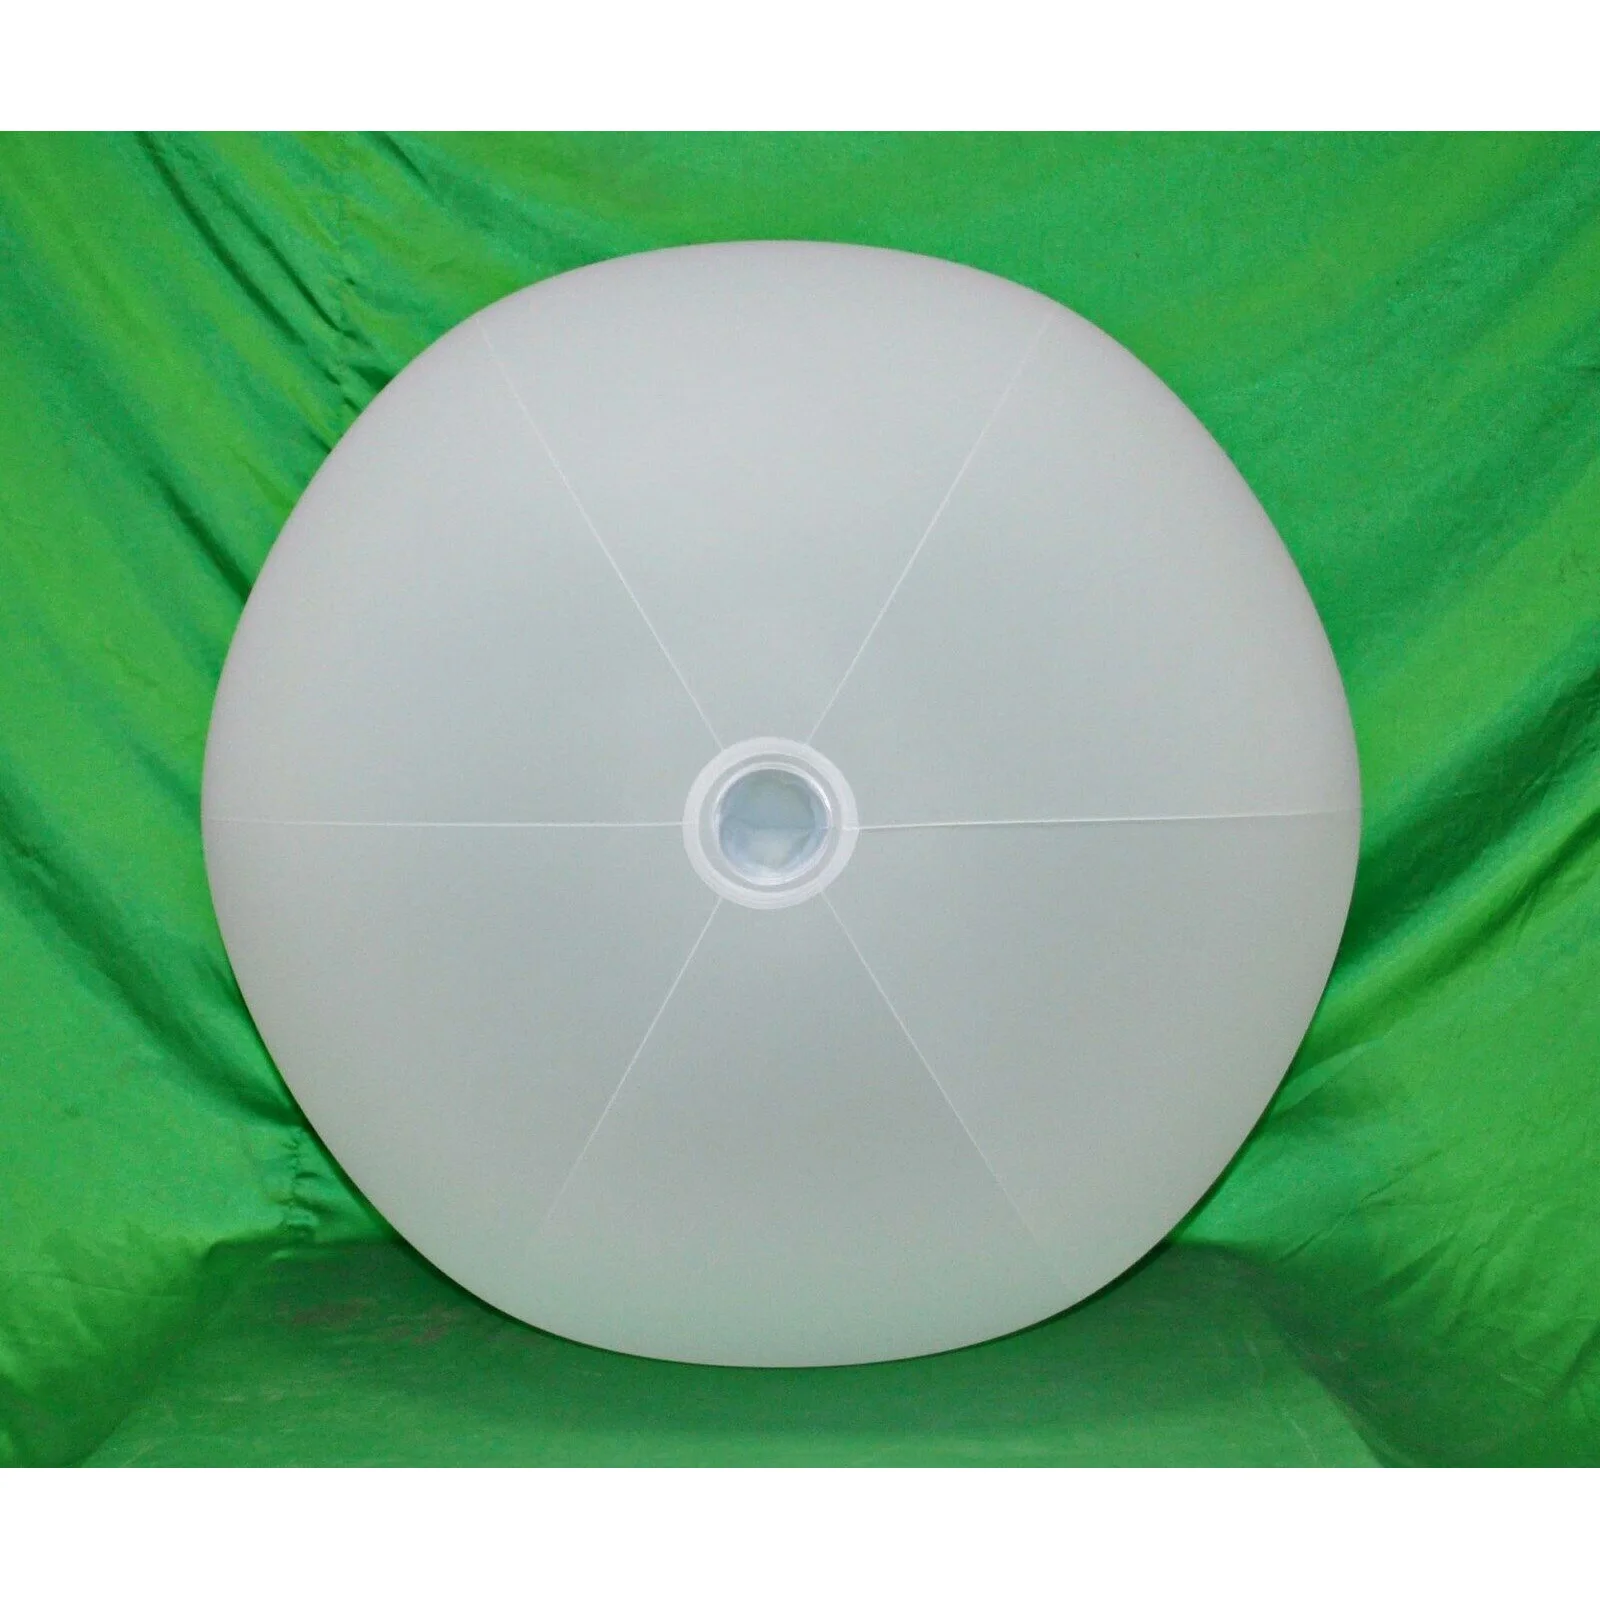 48" Inflatable OPAQUE WHITE Glow Stick-Sprinkler Beach Ball w/ CLEAR FROST TUBE 